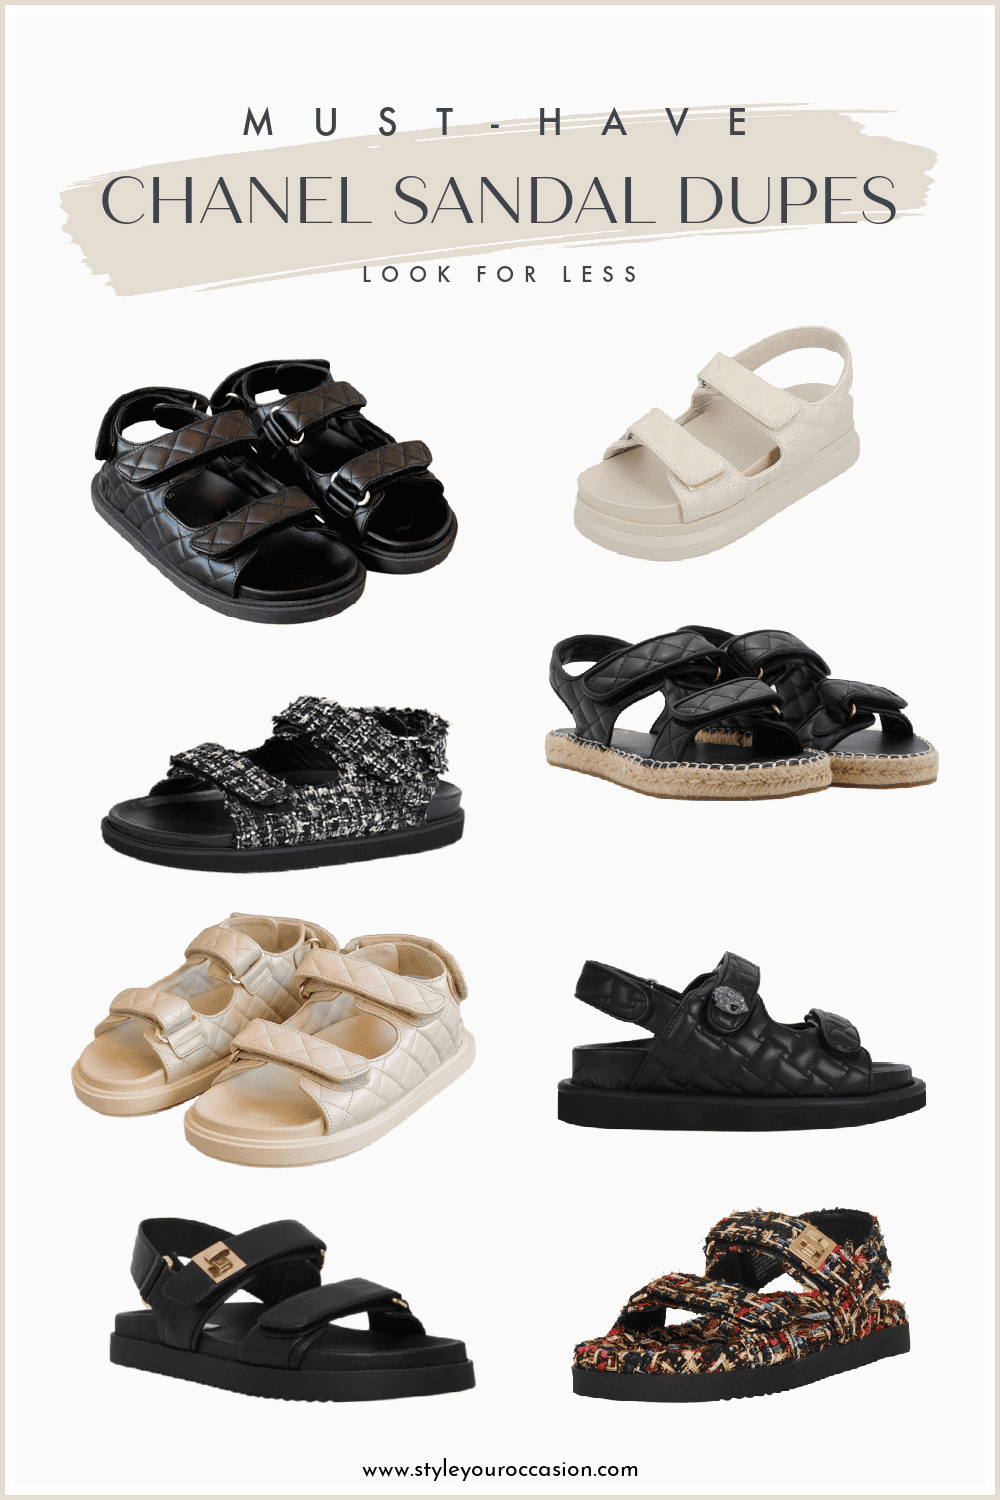 Image board of several Chanel sandal dupes in white, black, and tweed